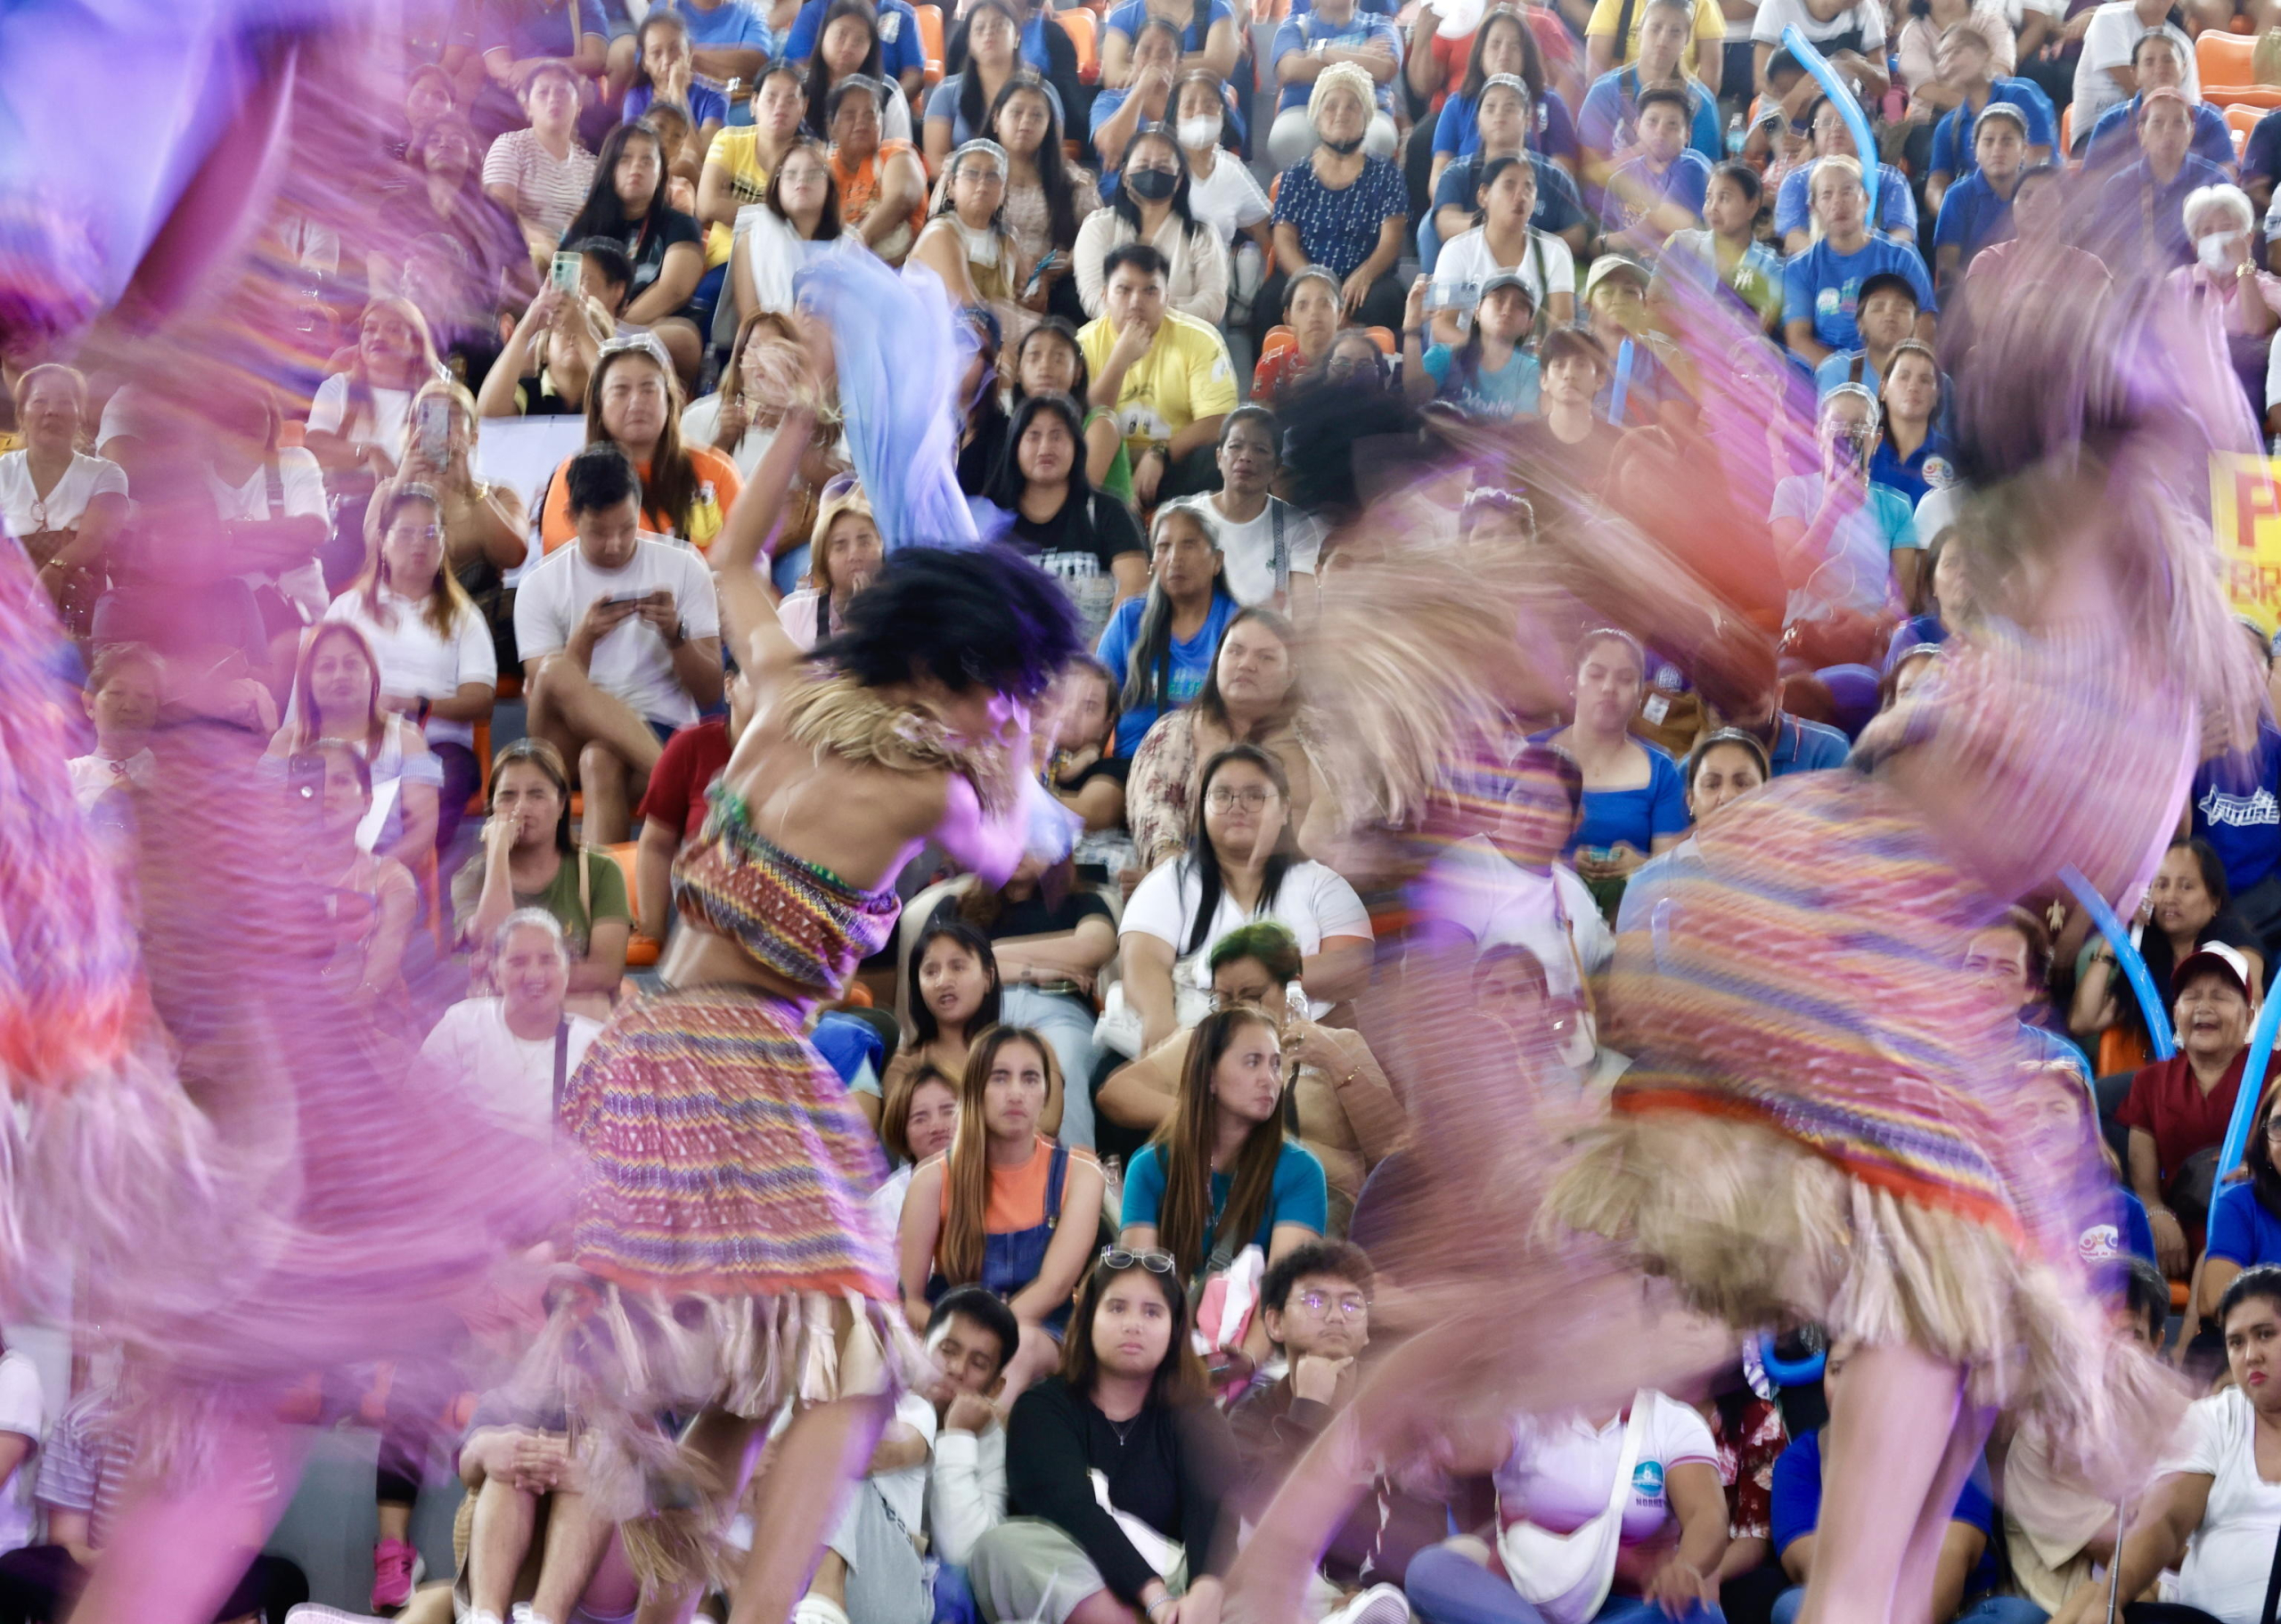 epa11529286 A slow shutter speed photo shows Filipino teens, wearing traditional costumes made from dried water hyacinth stalks, performing during the Water Lily Festival in Las Pinas city, Metro Manila, Philippines, 06 August 2024. The annual Water Lily Festival in Las Pinas city was declared by the Villar Foundation to highlight the transformation of water lilies from aquatic nuisances to valuable resources. Through the 'Water Lily Weaving Project', the foundation turns these plants into handicrafts, creating livelihoods and aiding community rehabilitation. During the festival, villagers parade in traditional costumes made from dried water lilies, showcasing the project's success and promoting the benefits of water lily-based livelihoods for local residents.  EPA/FRANCIS R. MALASIG